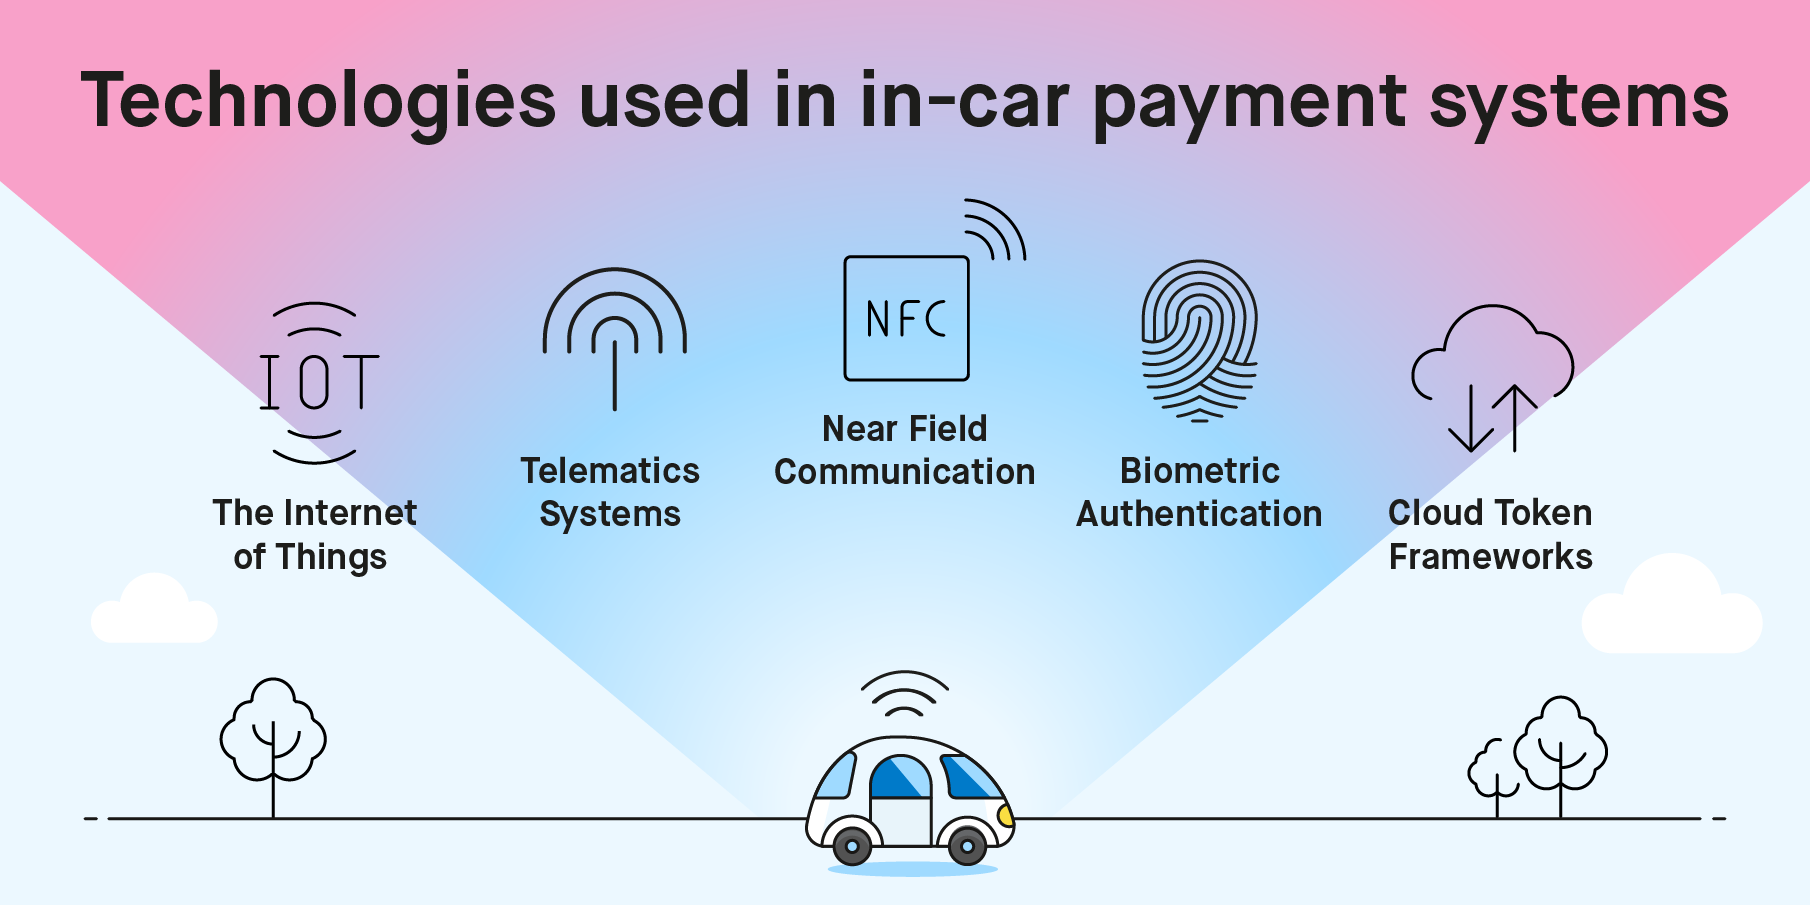 Car payment systems technologies